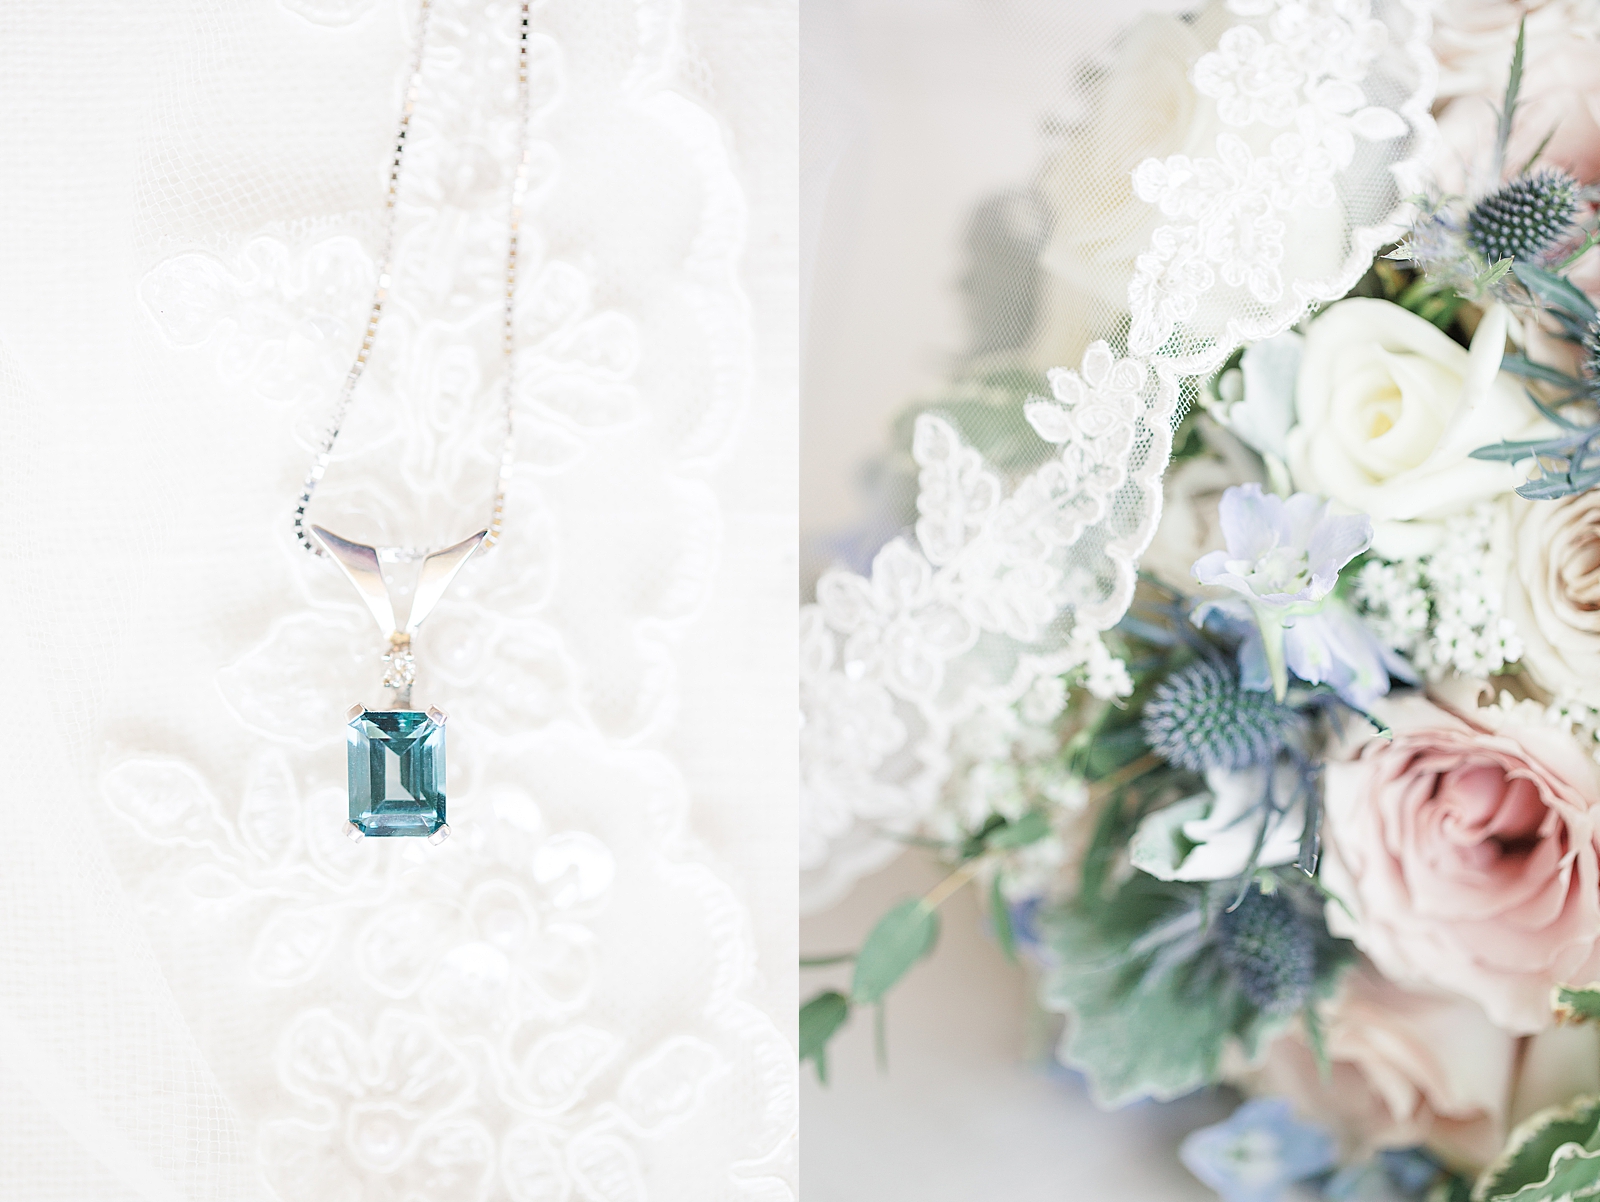 Rumbling Bald Resort Wedding Blue diamond necklace on lace veil and brides bouquet and lace veil Photos